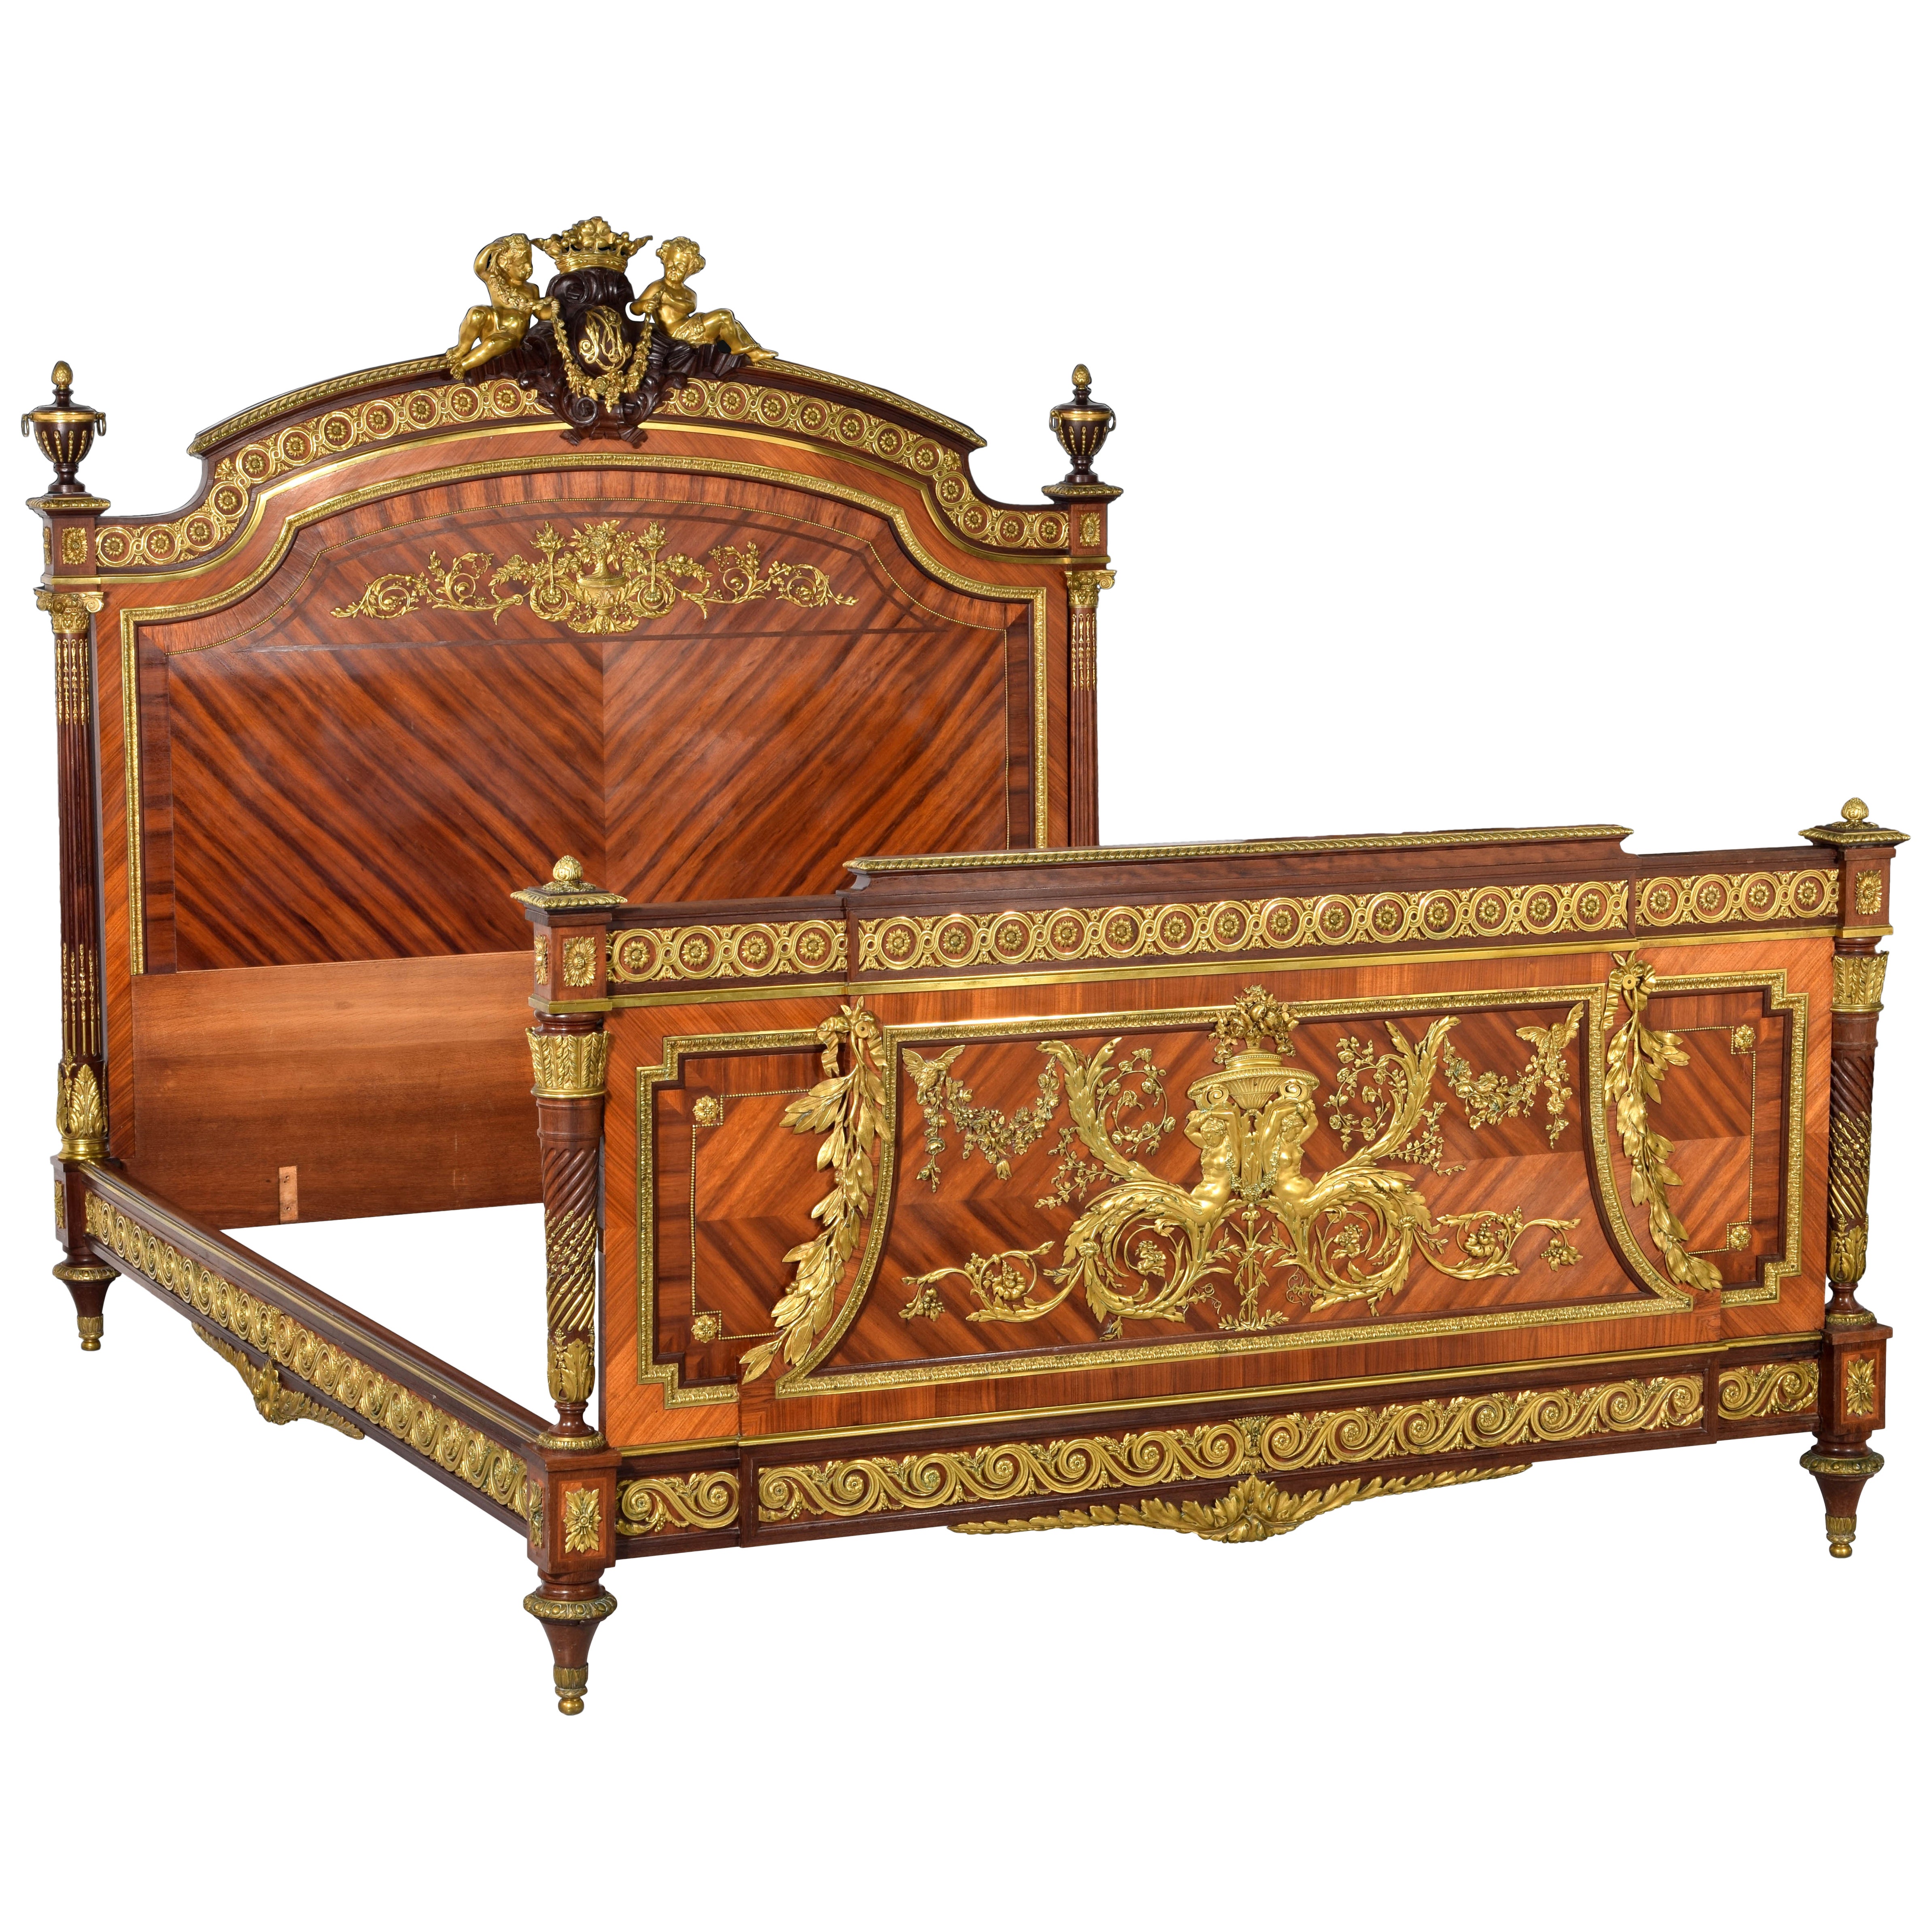 Bed. Wood, gilded bronze, metal. QUIGNON FILS. Paris, France, ca late 19th cent. For Sale